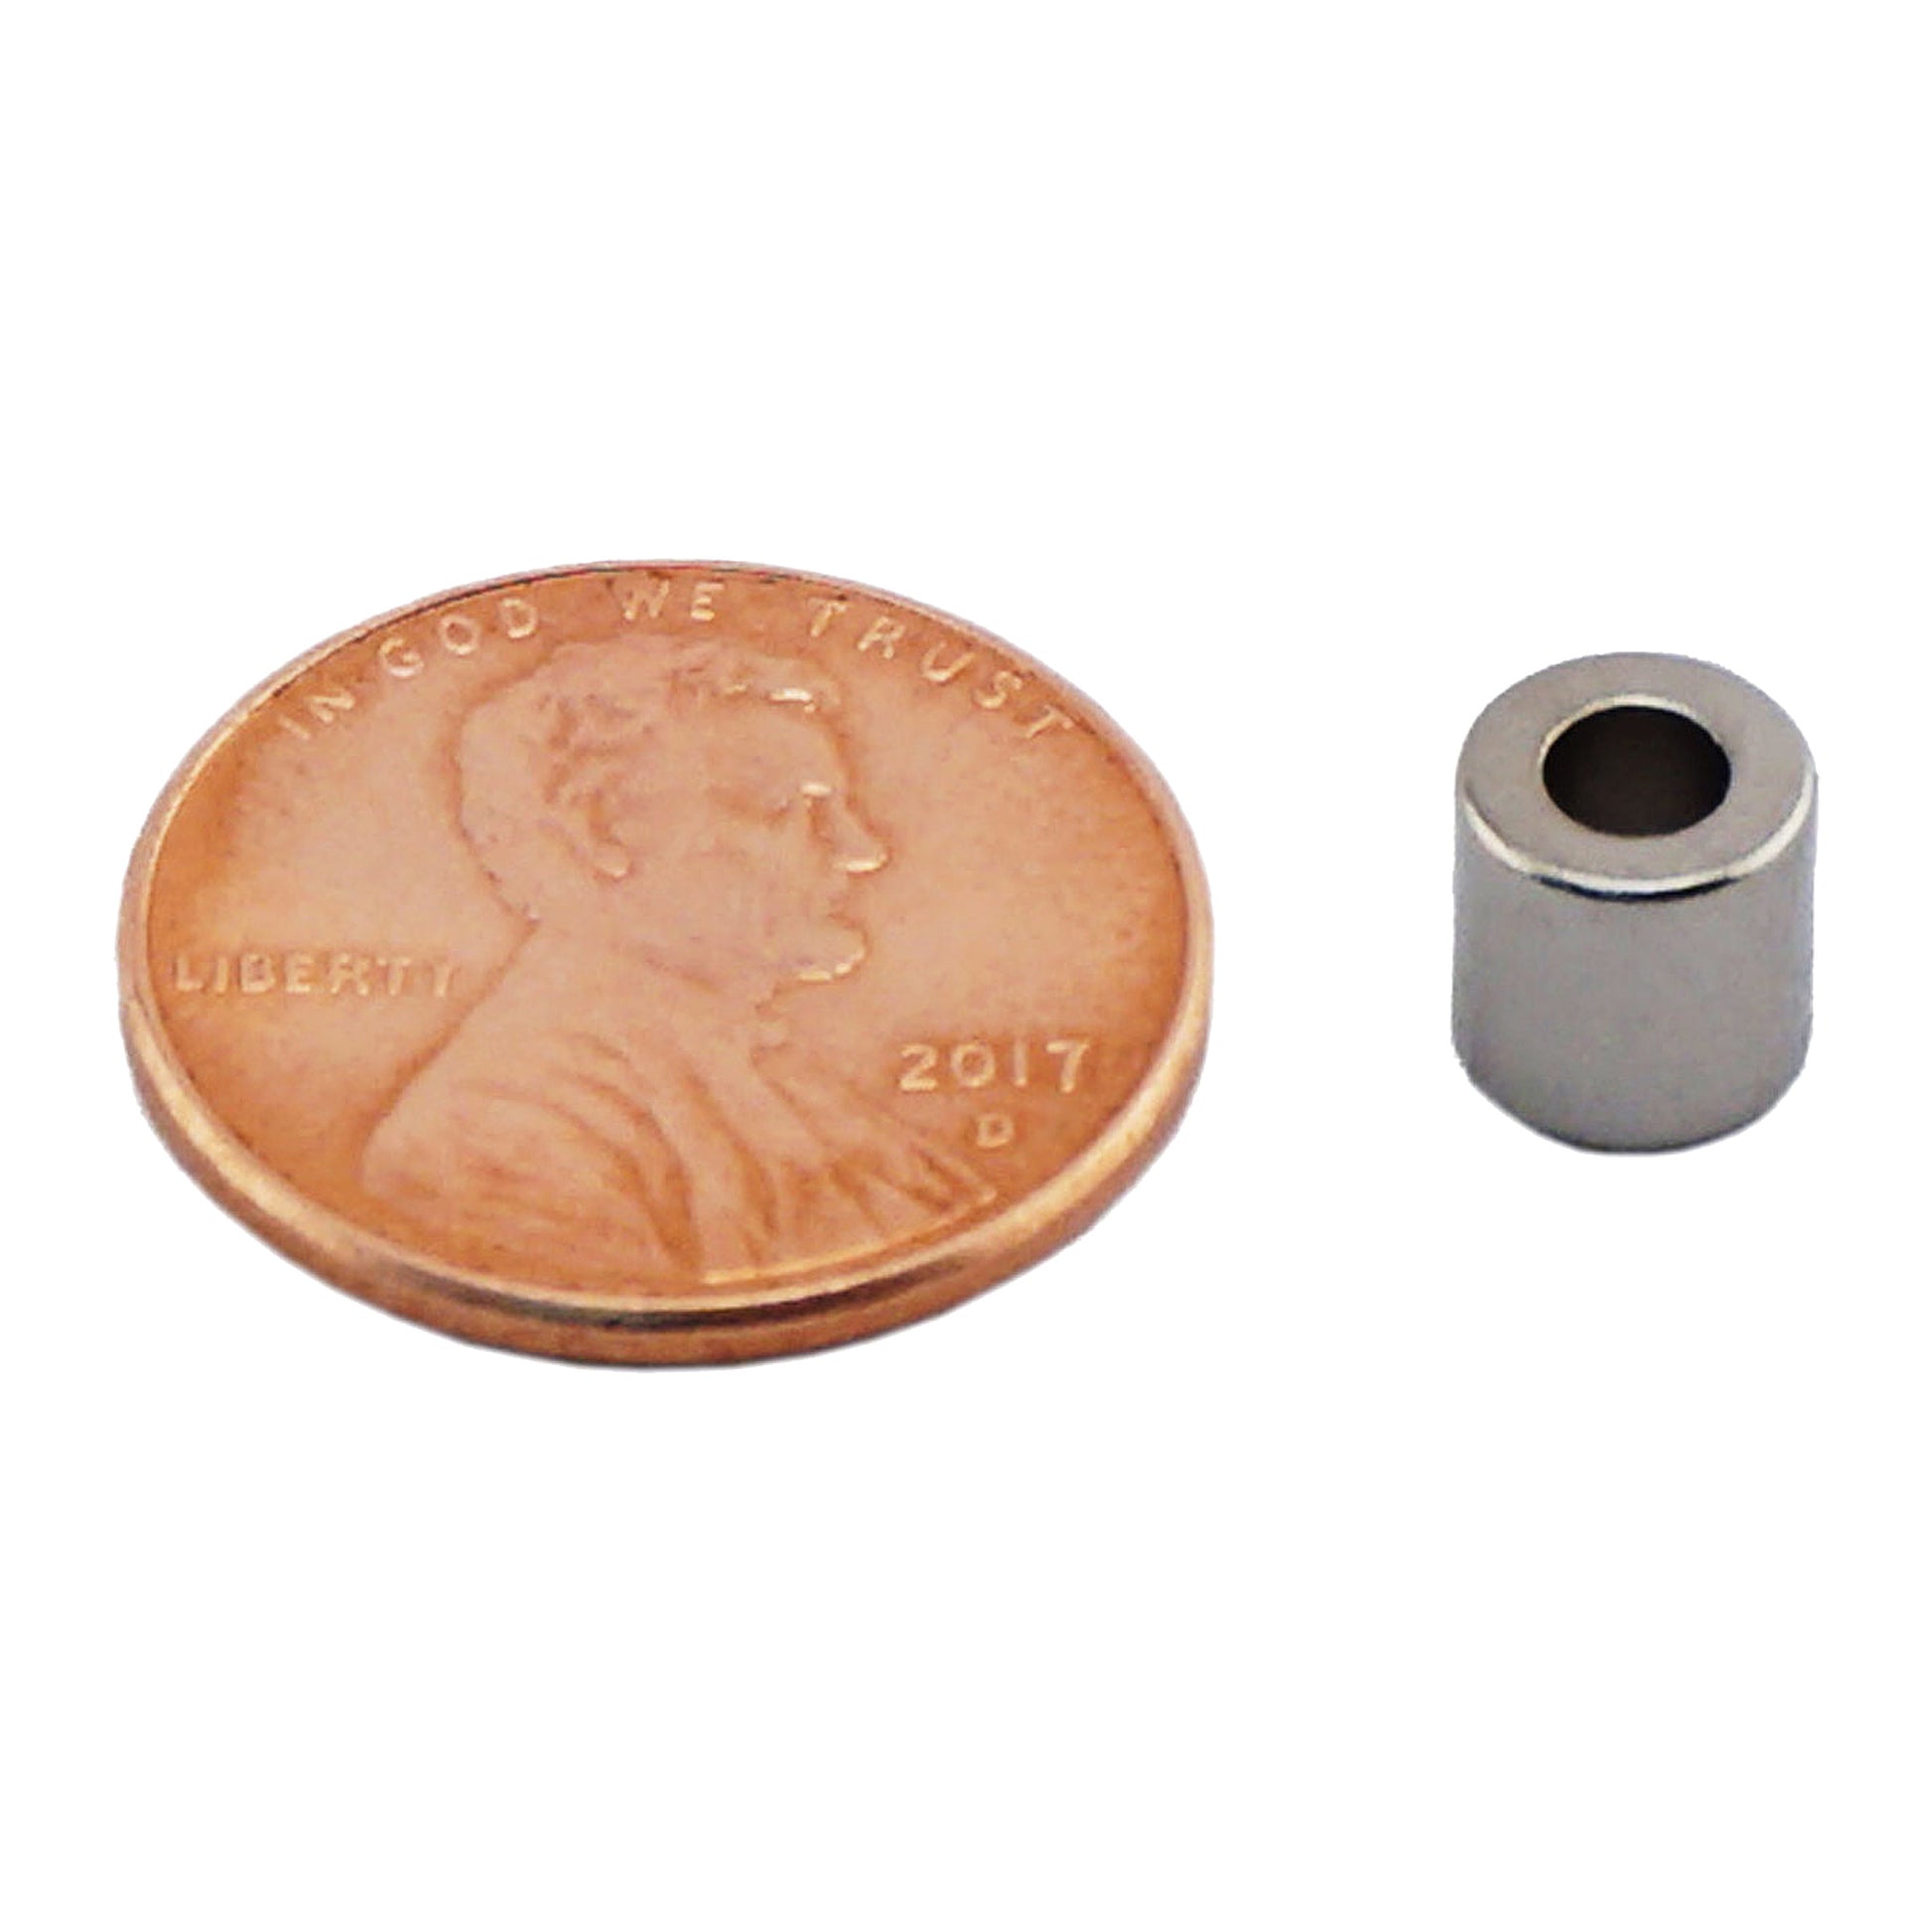 Load image into Gallery viewer, NR002508N Neodymium Ring Magnet - Compared to Penny for Size Reference